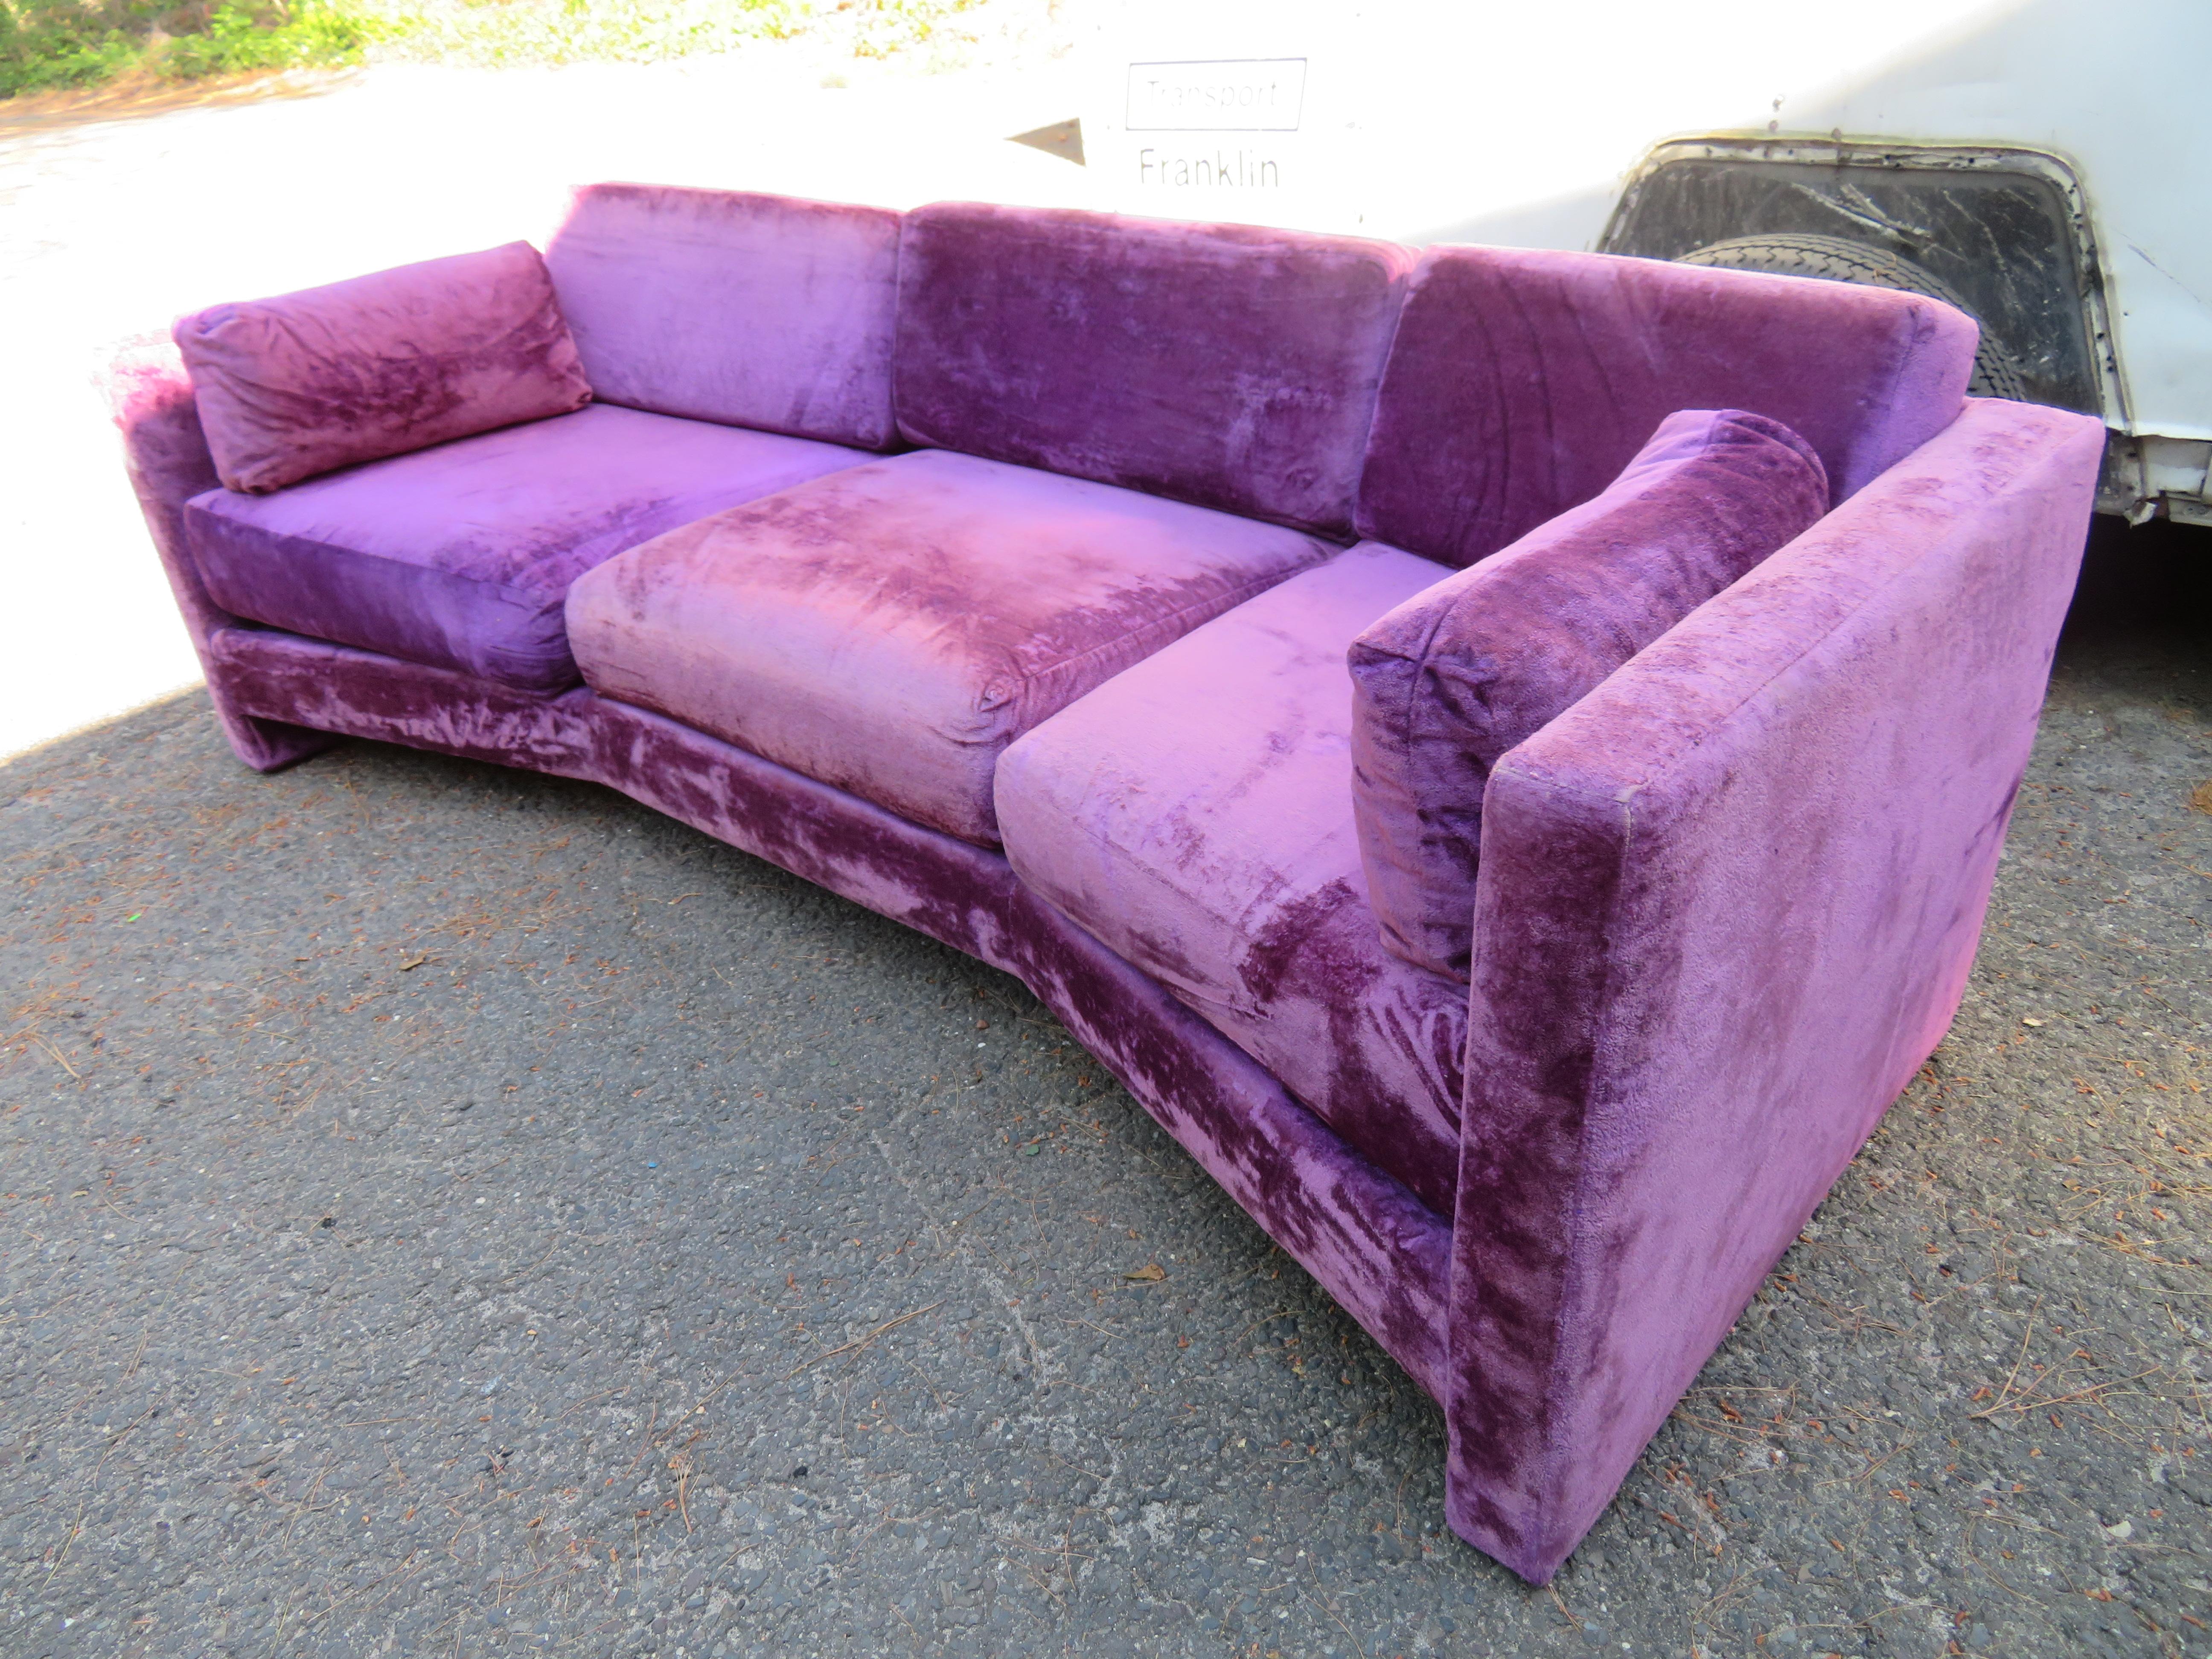 Outrageous Harvey Probber style purple velvet curved back sofa. This super sexy sofa retains its original shimmery purple crushed velvet in very presentable condition. It shows some minor wear to the arms but the vintage vibe this sofa has is beyond